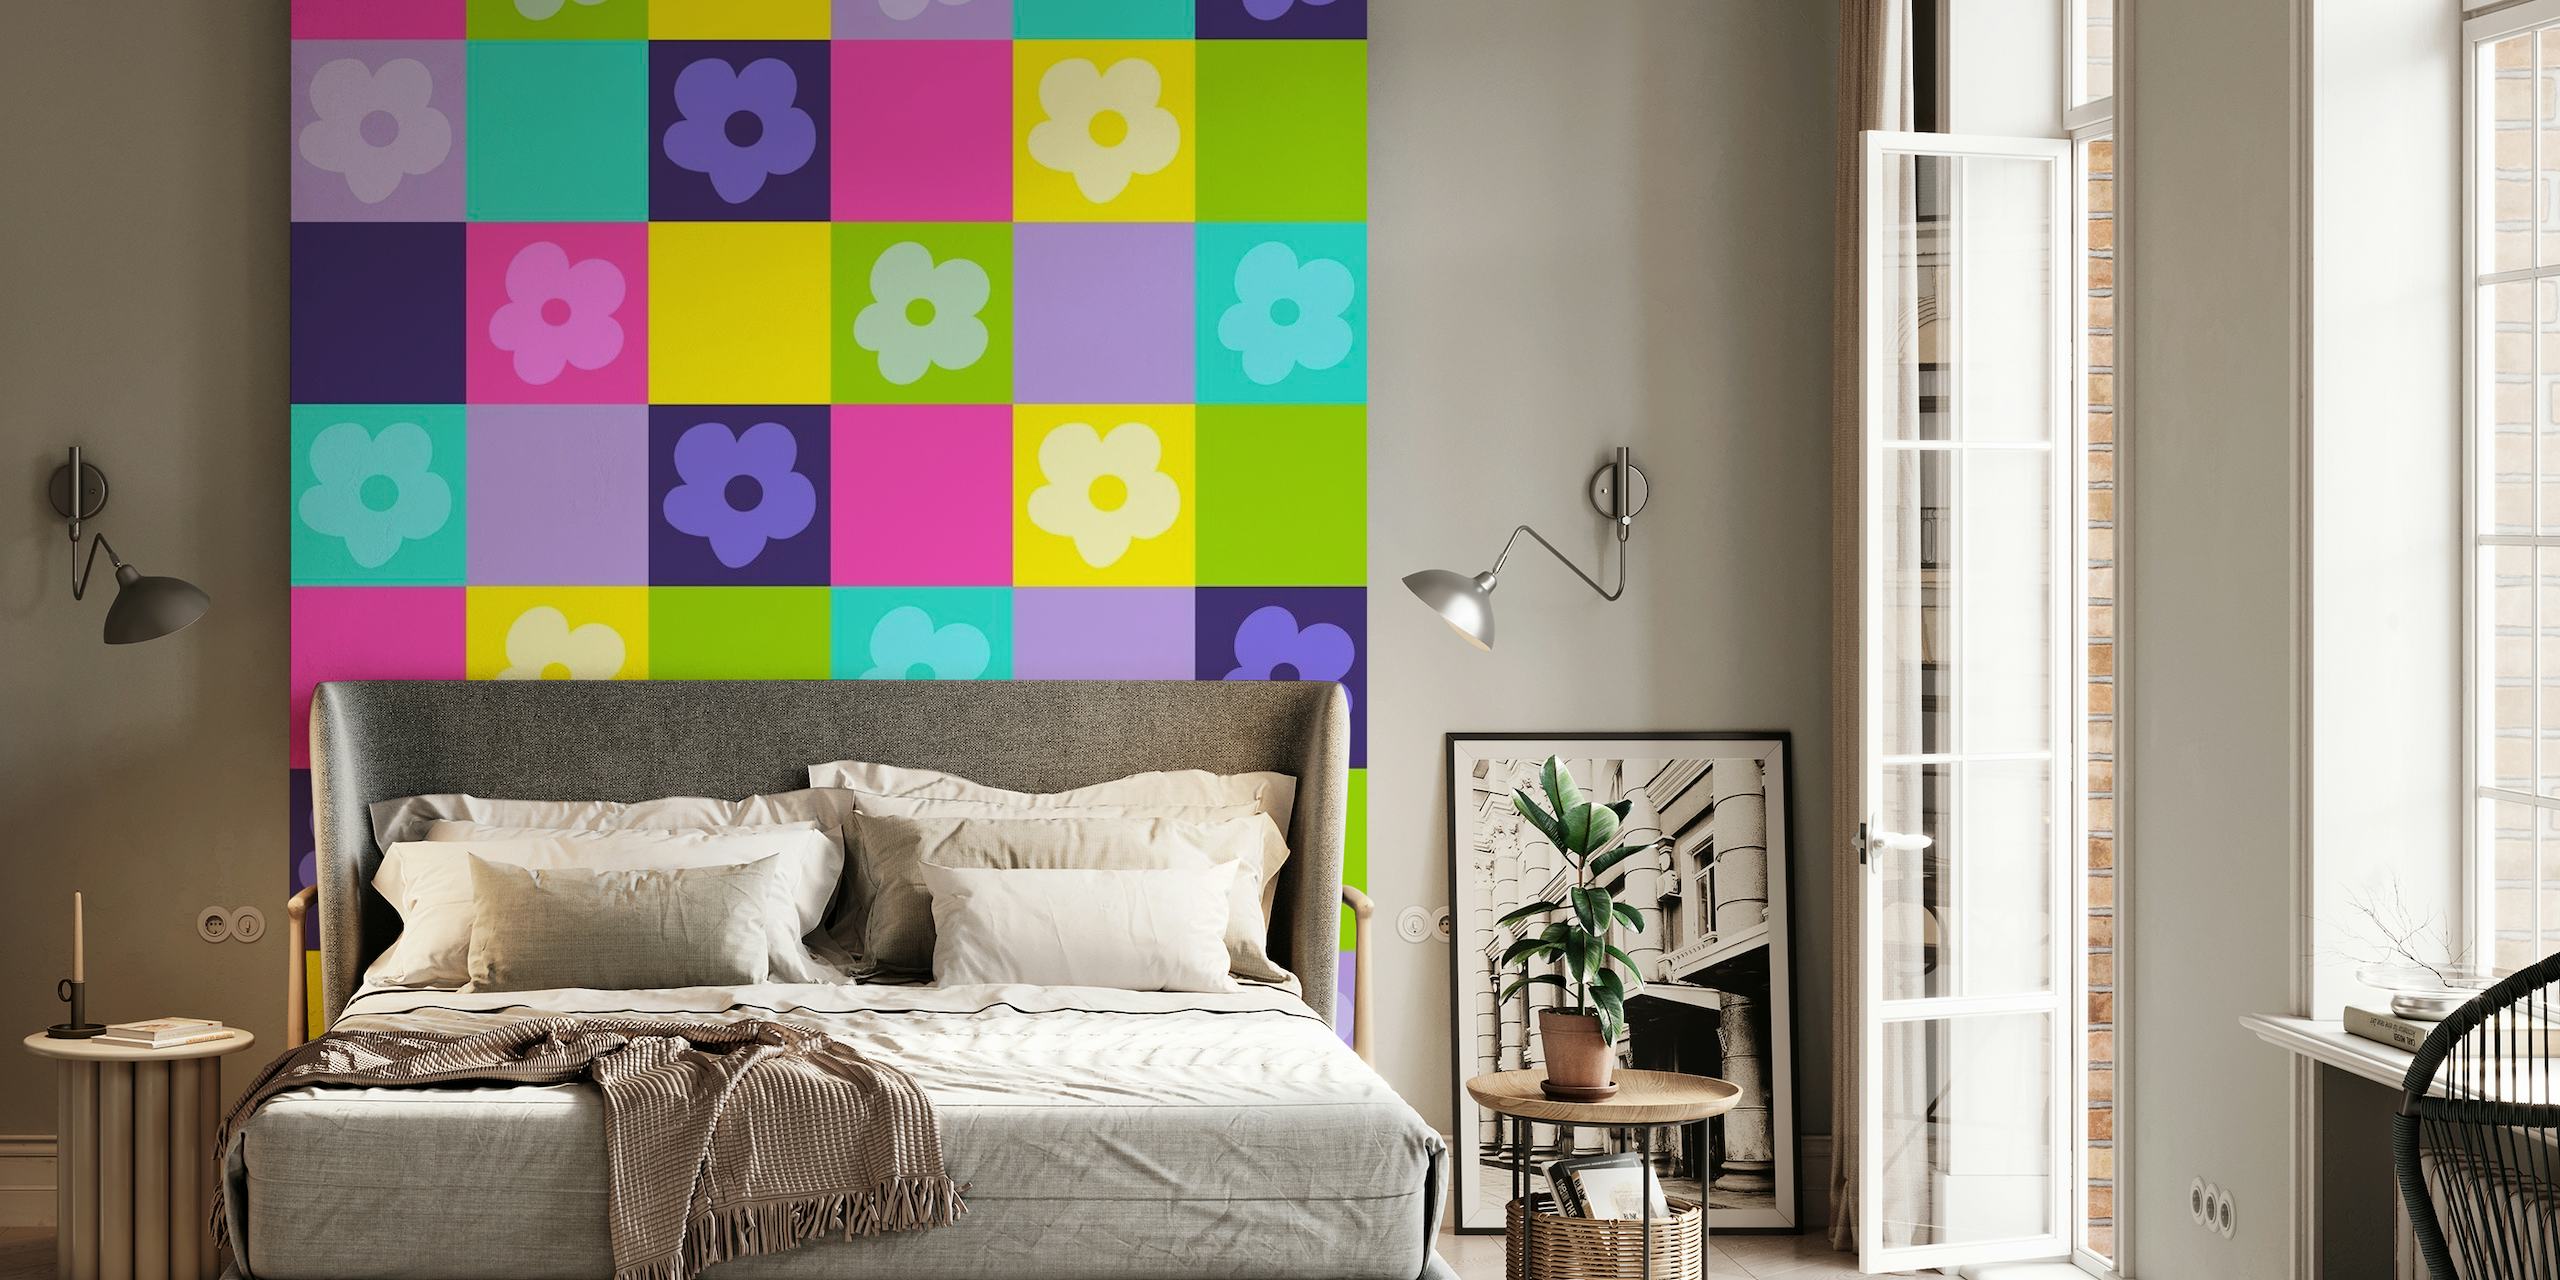 Colorful 80s-inspired neon checkered wall mural with simple flower patterns